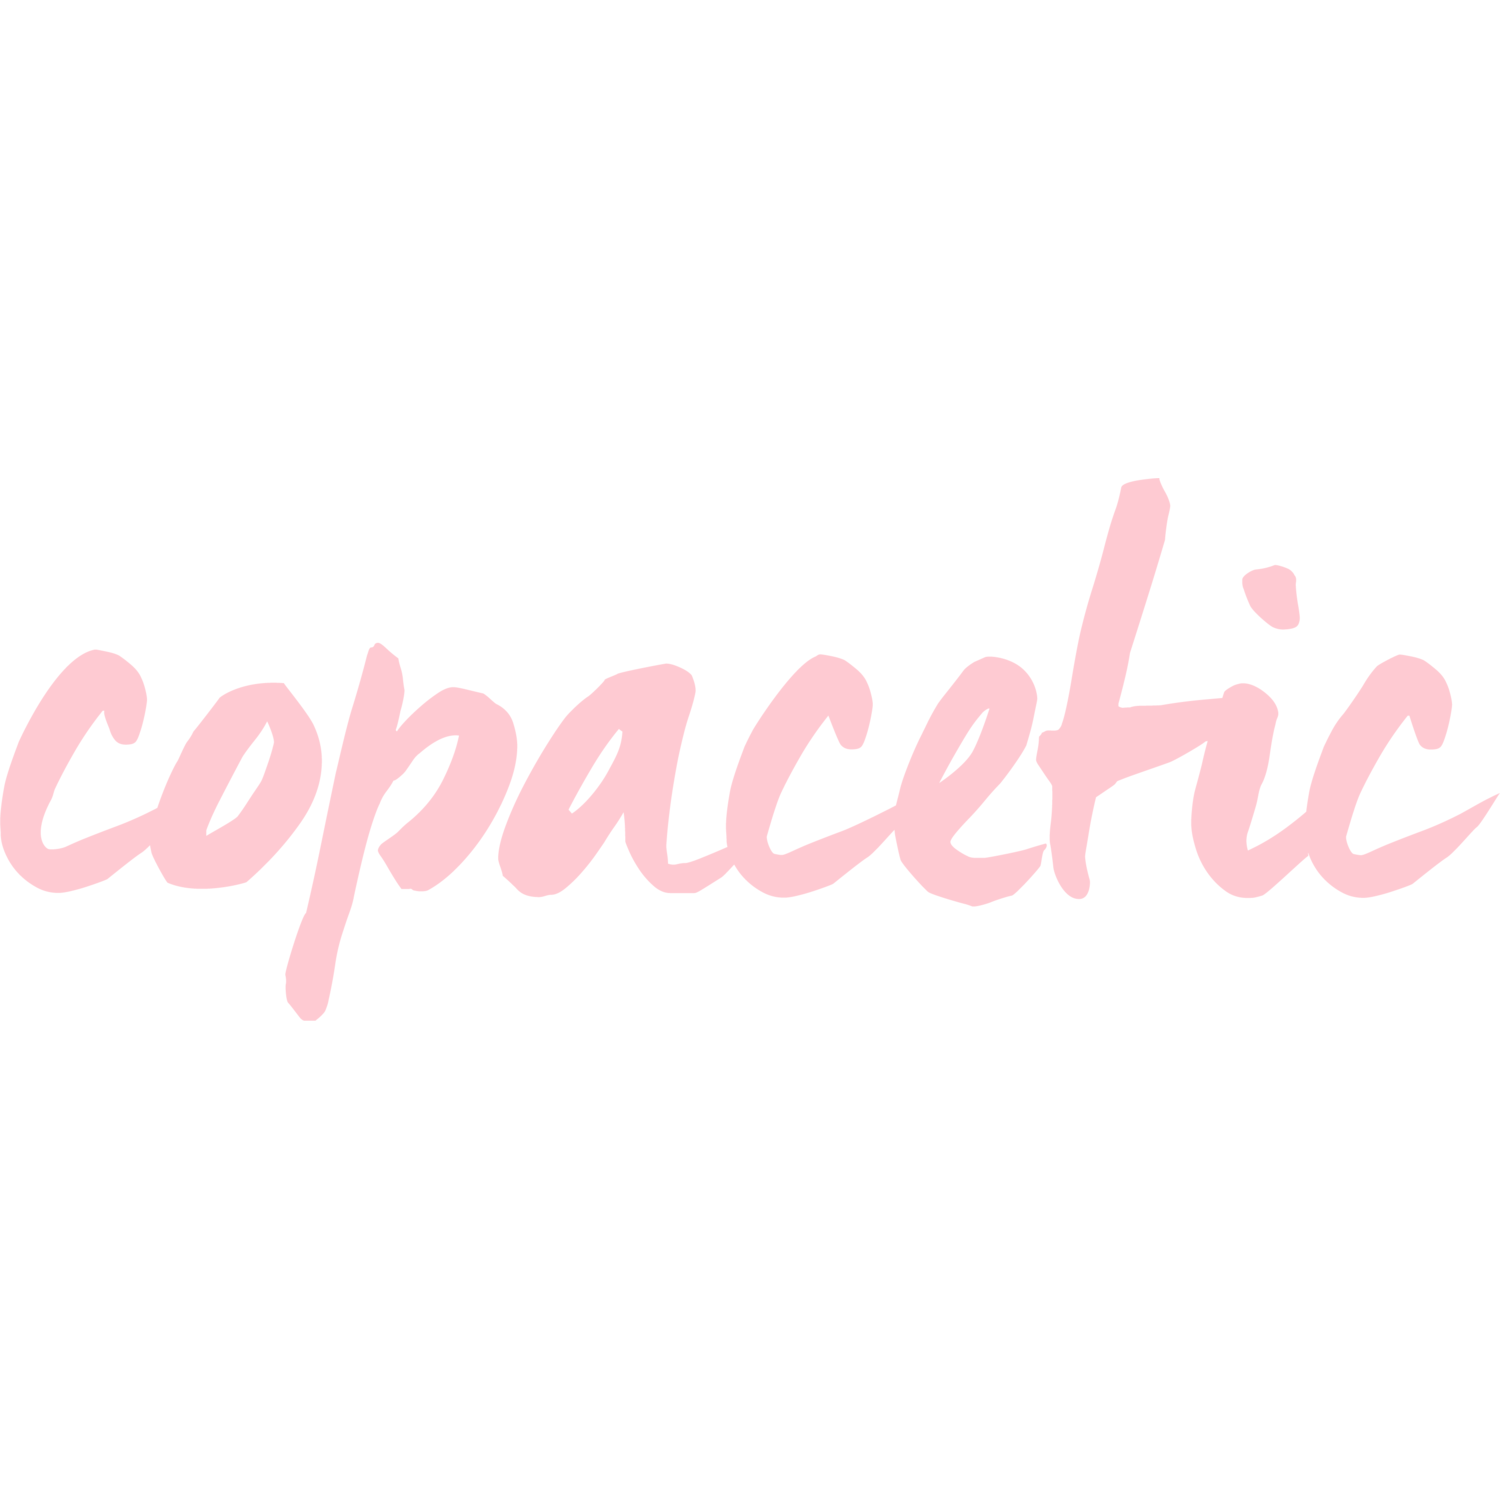 Copacetic Beauty Lounge - Pittsburgh, PA 15237 - (412)837-2534 | ShowMeLocal.com